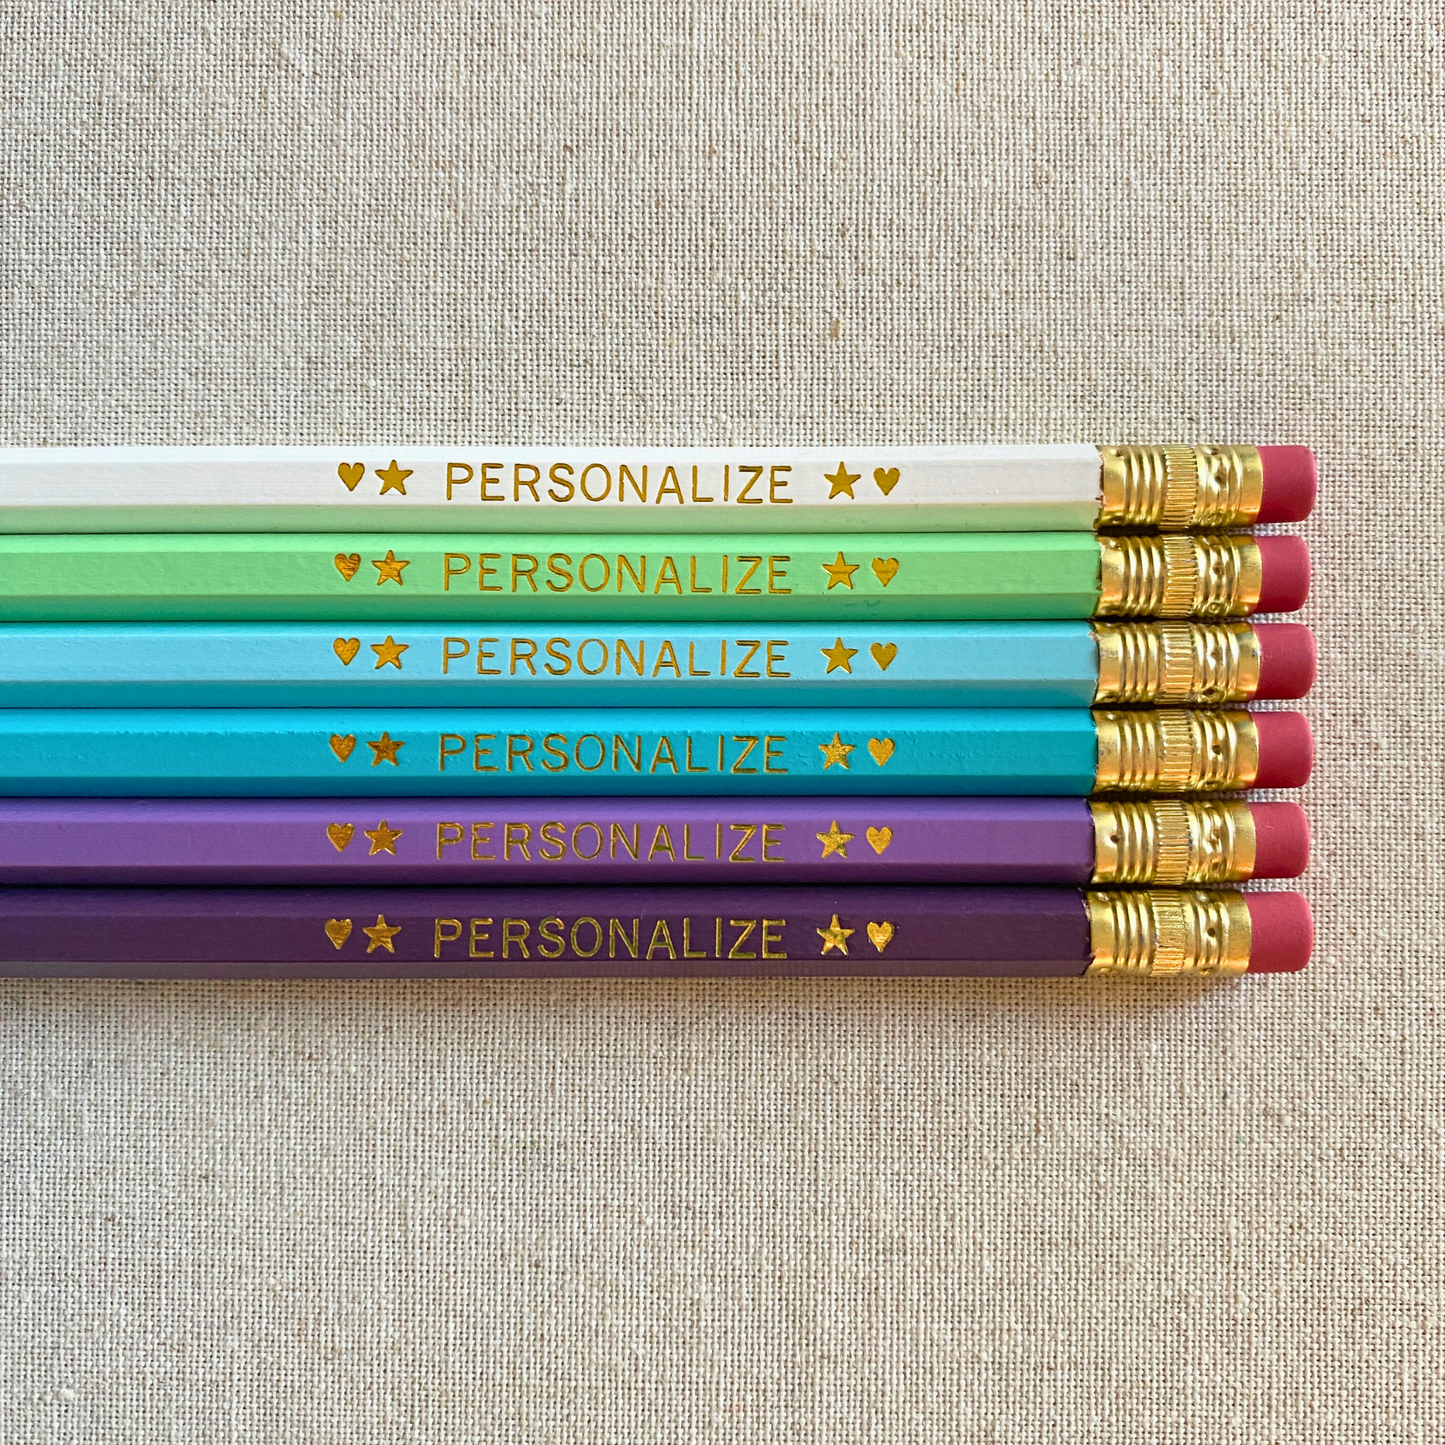 6 Personalized Pencils. White, Pastel Green, Pastel Blue, Aqua, Lilac, Light Purple. Customize with a name or a phrase.